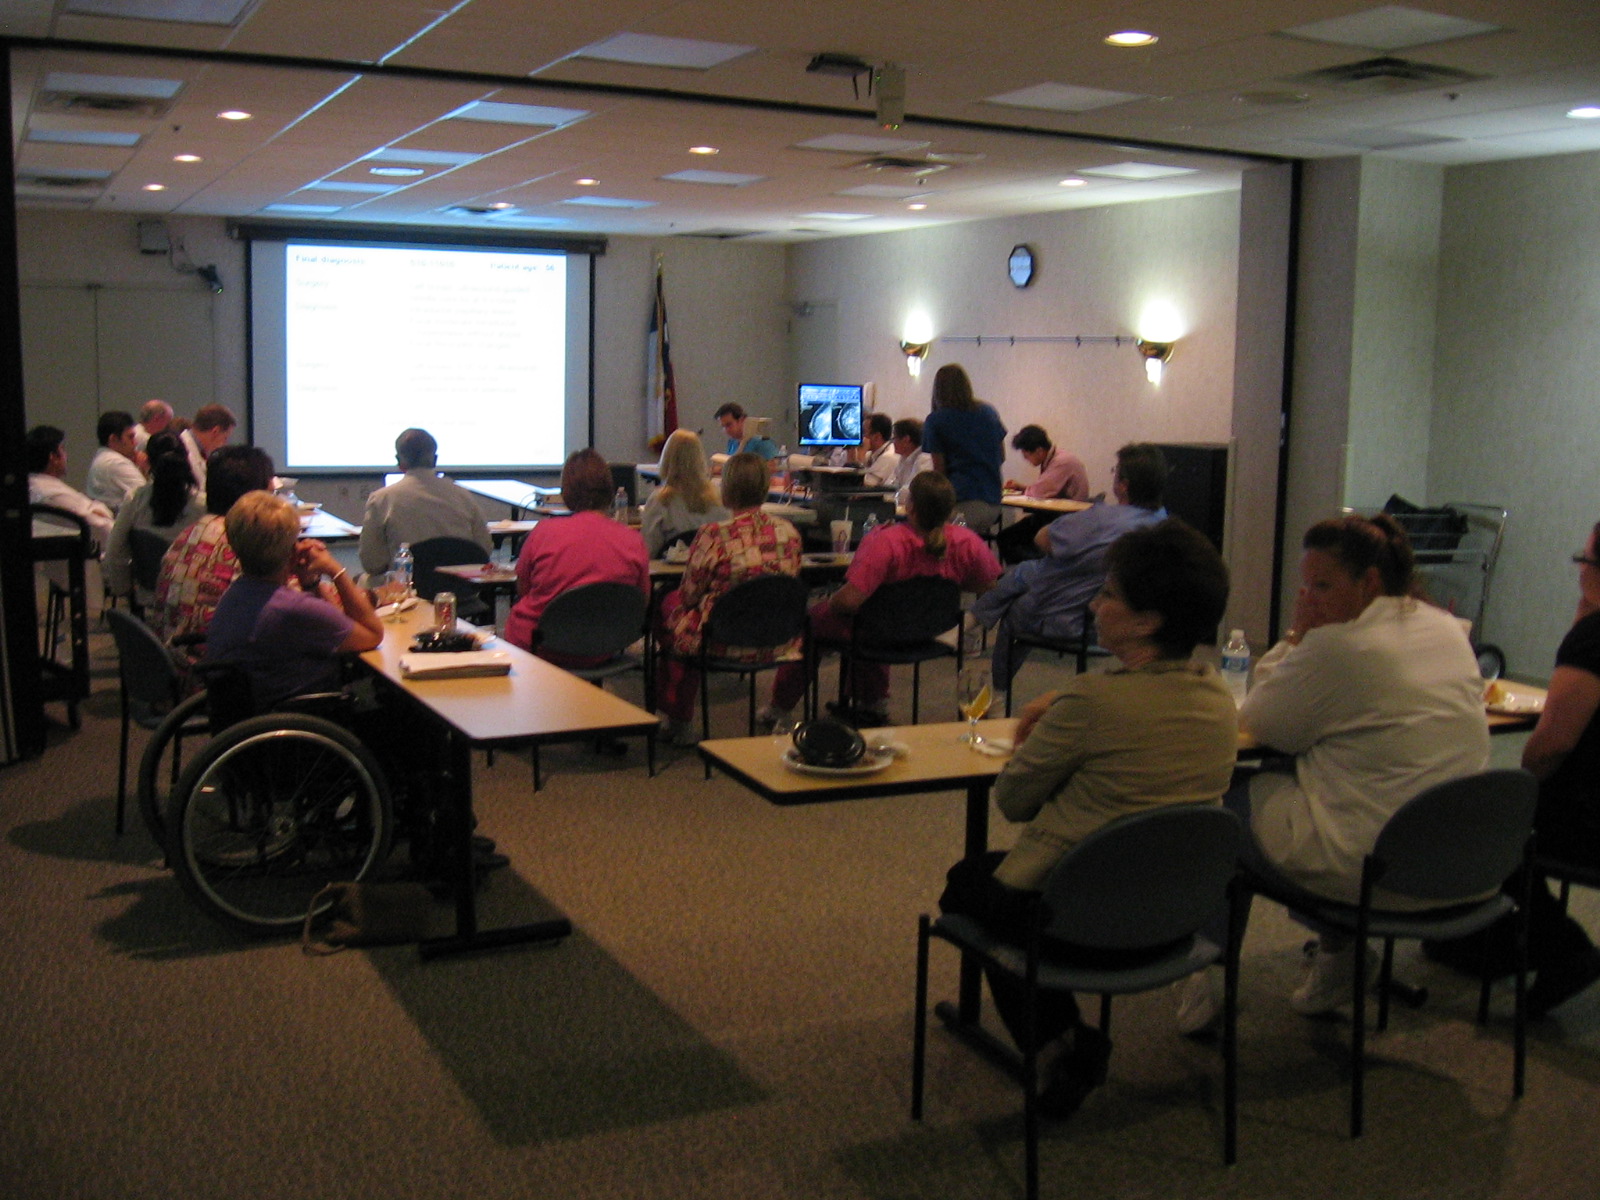 2001 photograph of our comprehensive breast conference held at Houston Northwest Medical Center hospital. In attendance are surgeons, medical and radiation oncologists, pathologists and mammographers. Also, present are key members of the breast support group. The equipment and presentation techniques have improved over the years. We are in our 22nd year as of 2018.